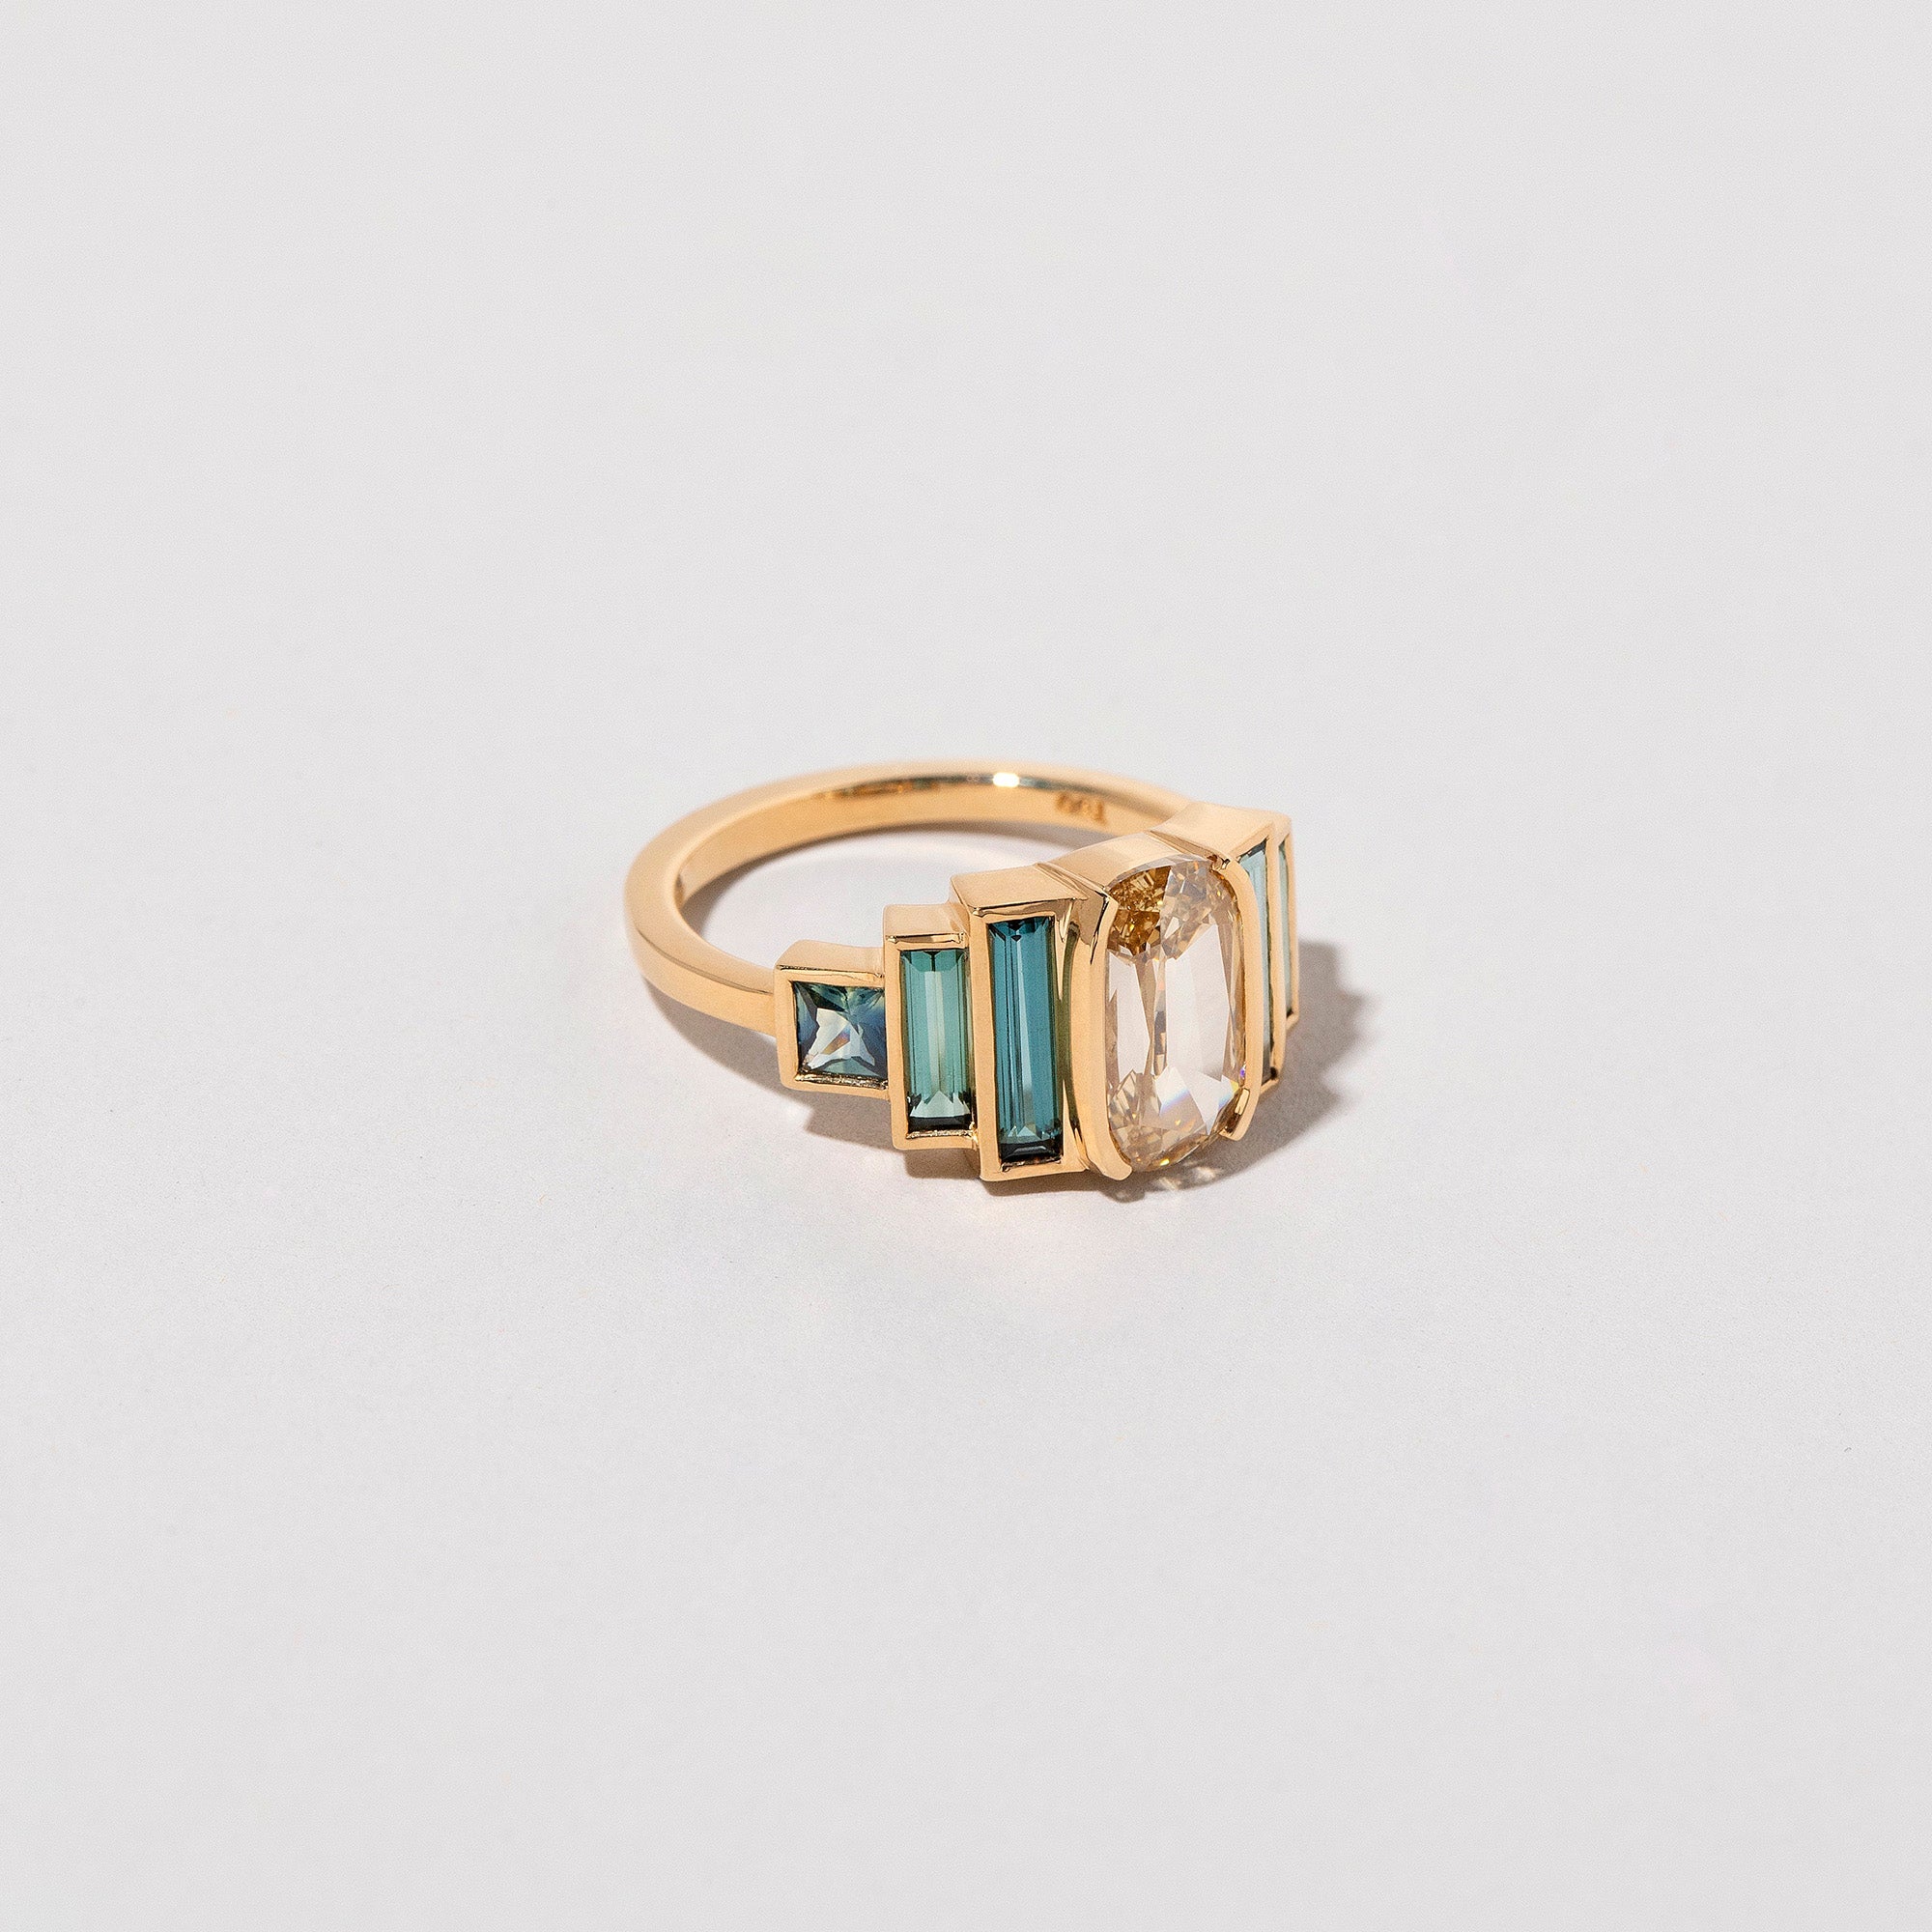 product_details:: Limoux Ring on light color background.